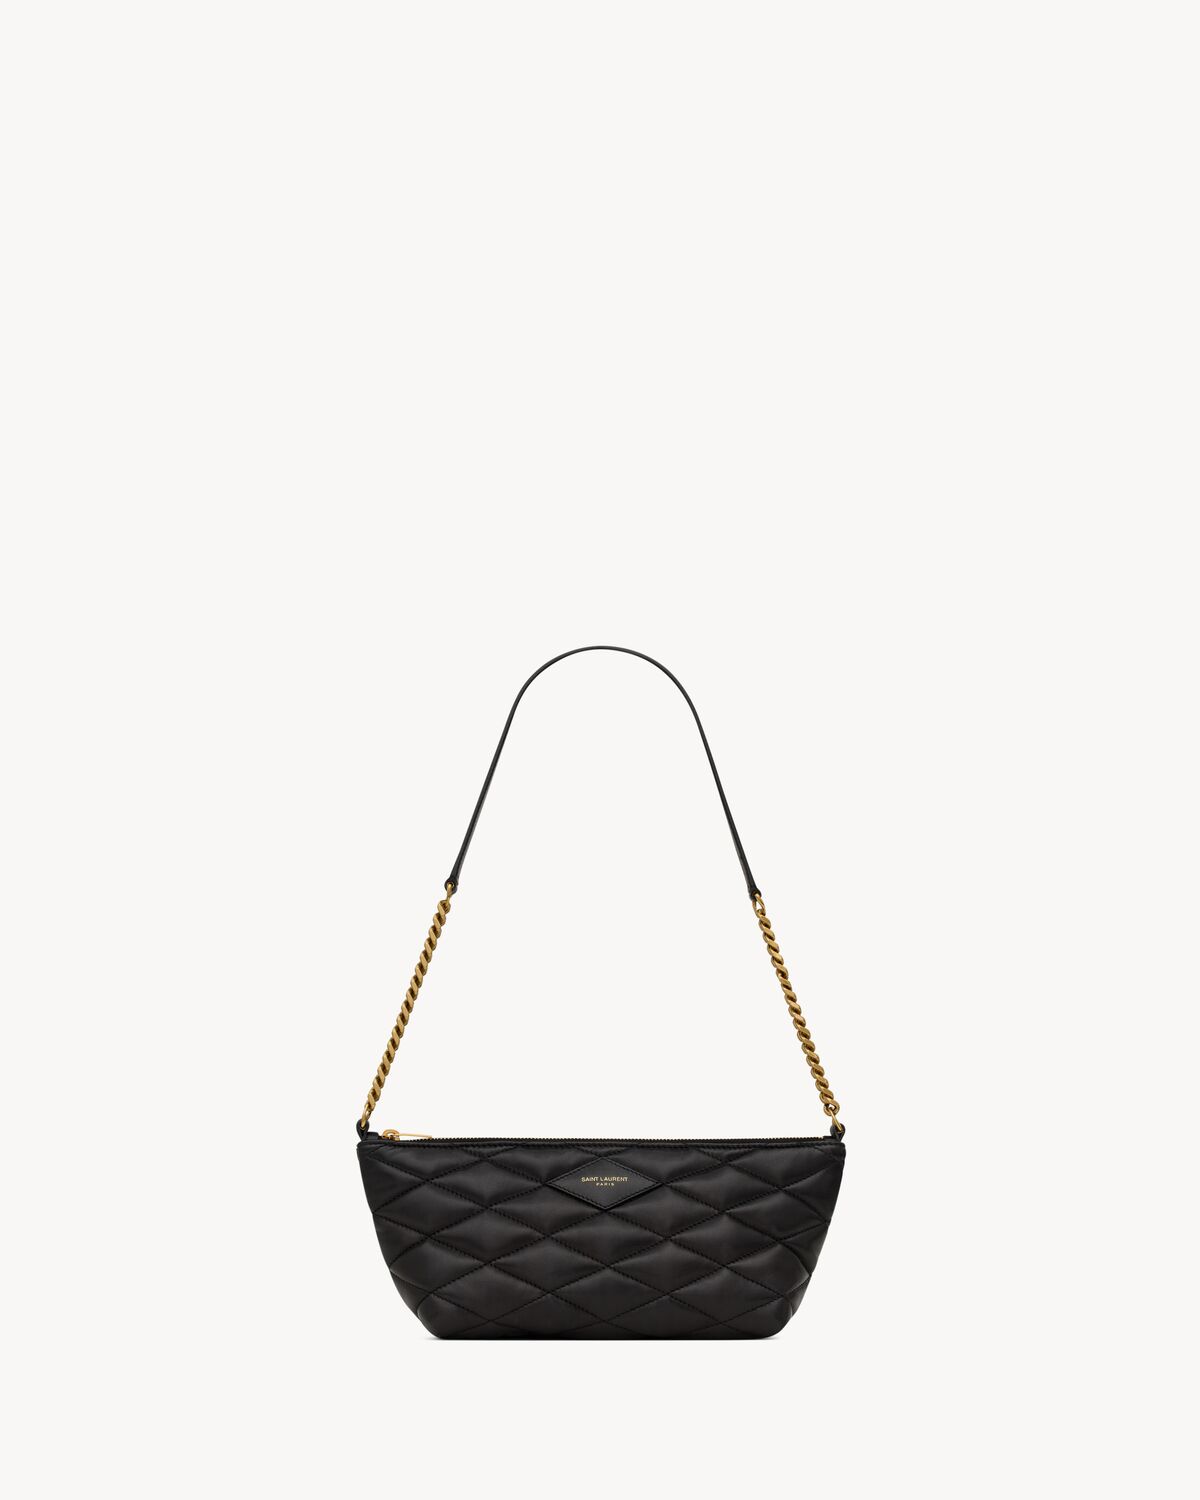 Mini bag in quilted lambskin